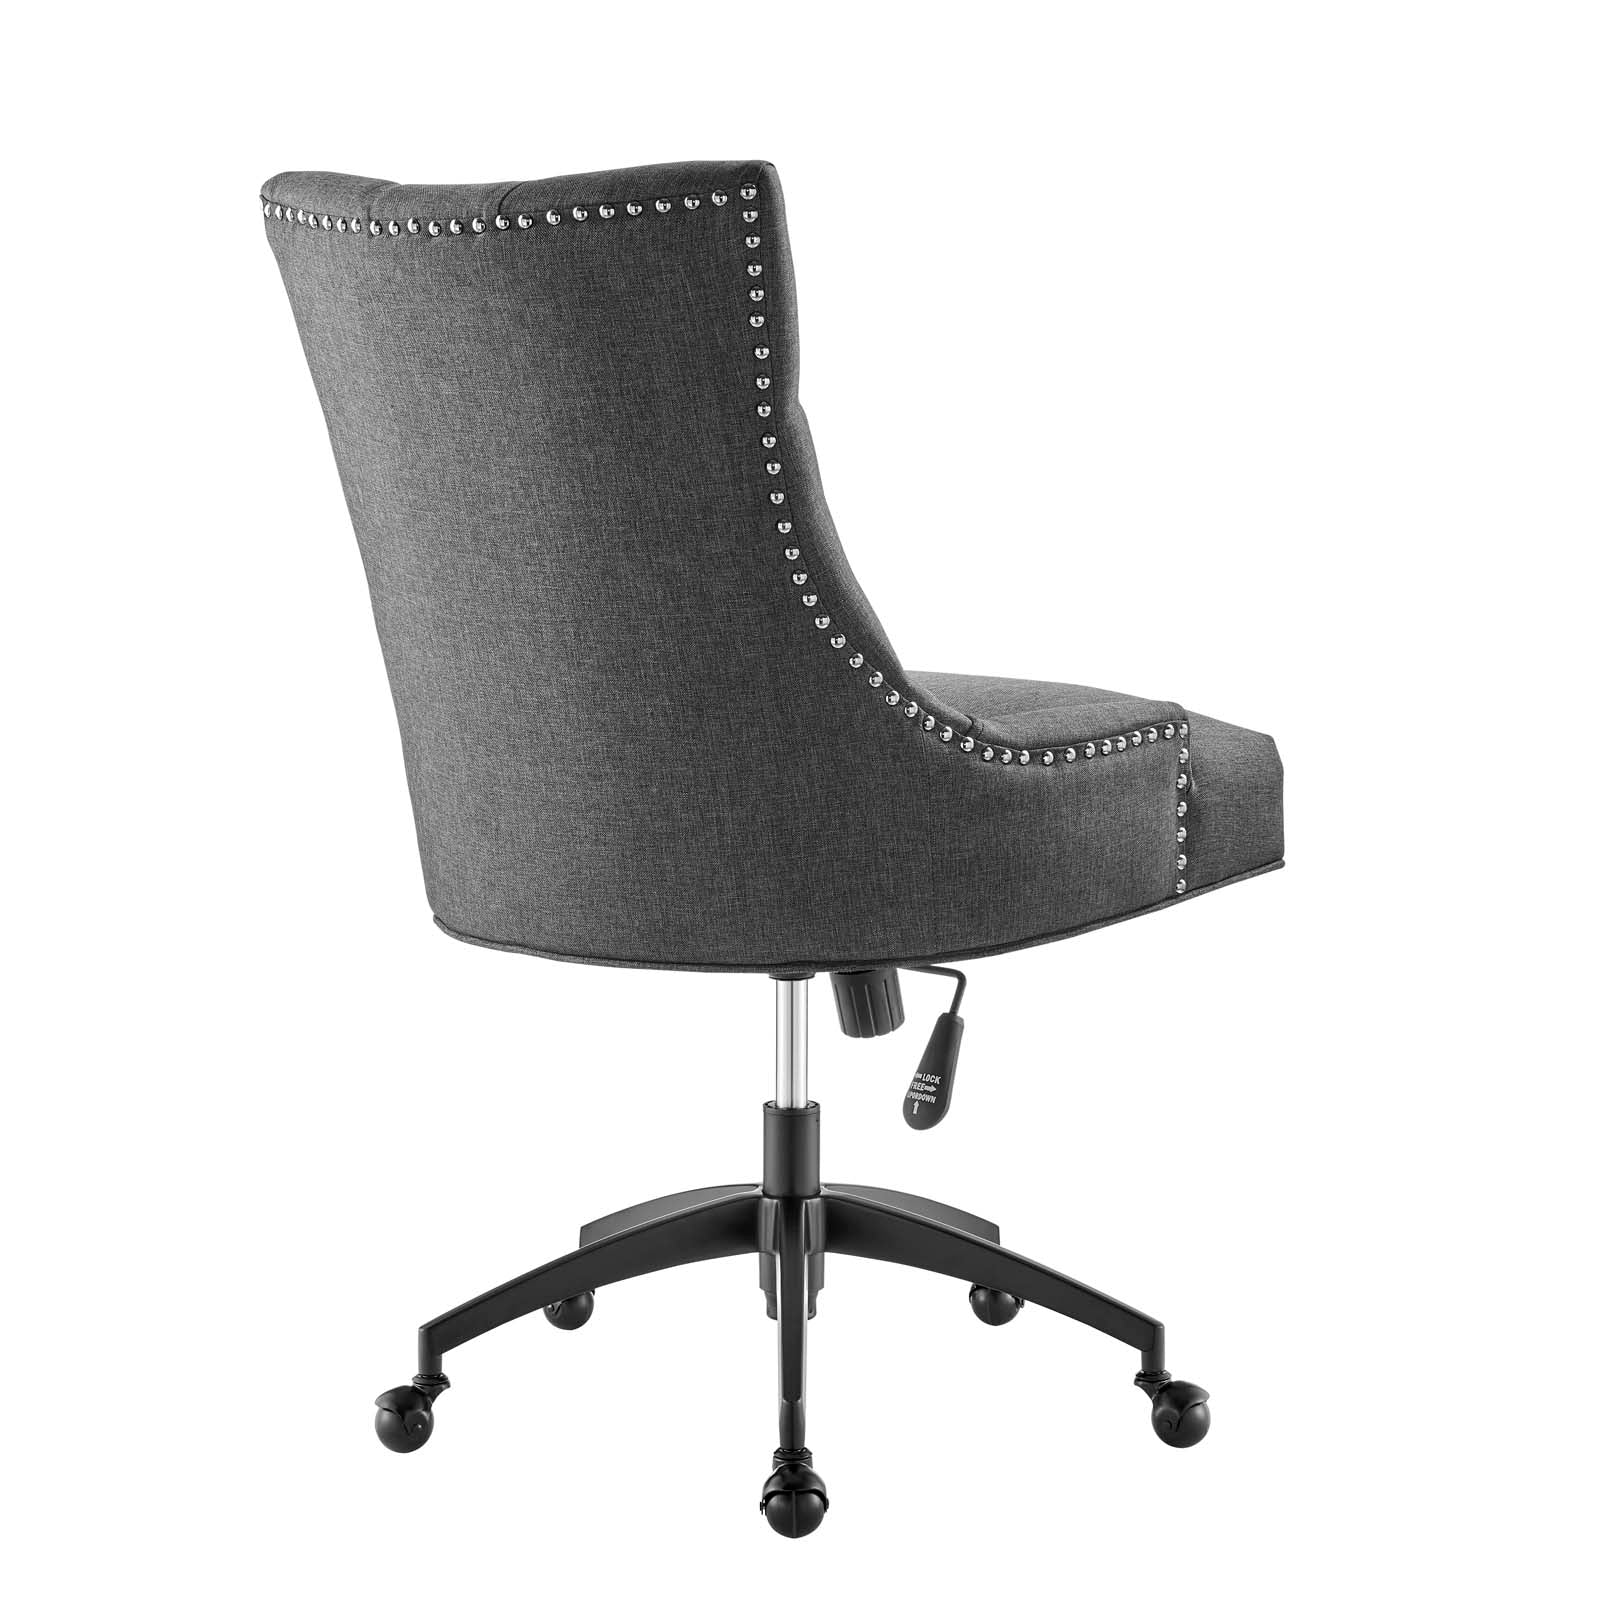 Regent Tufted Fabric Office Chair